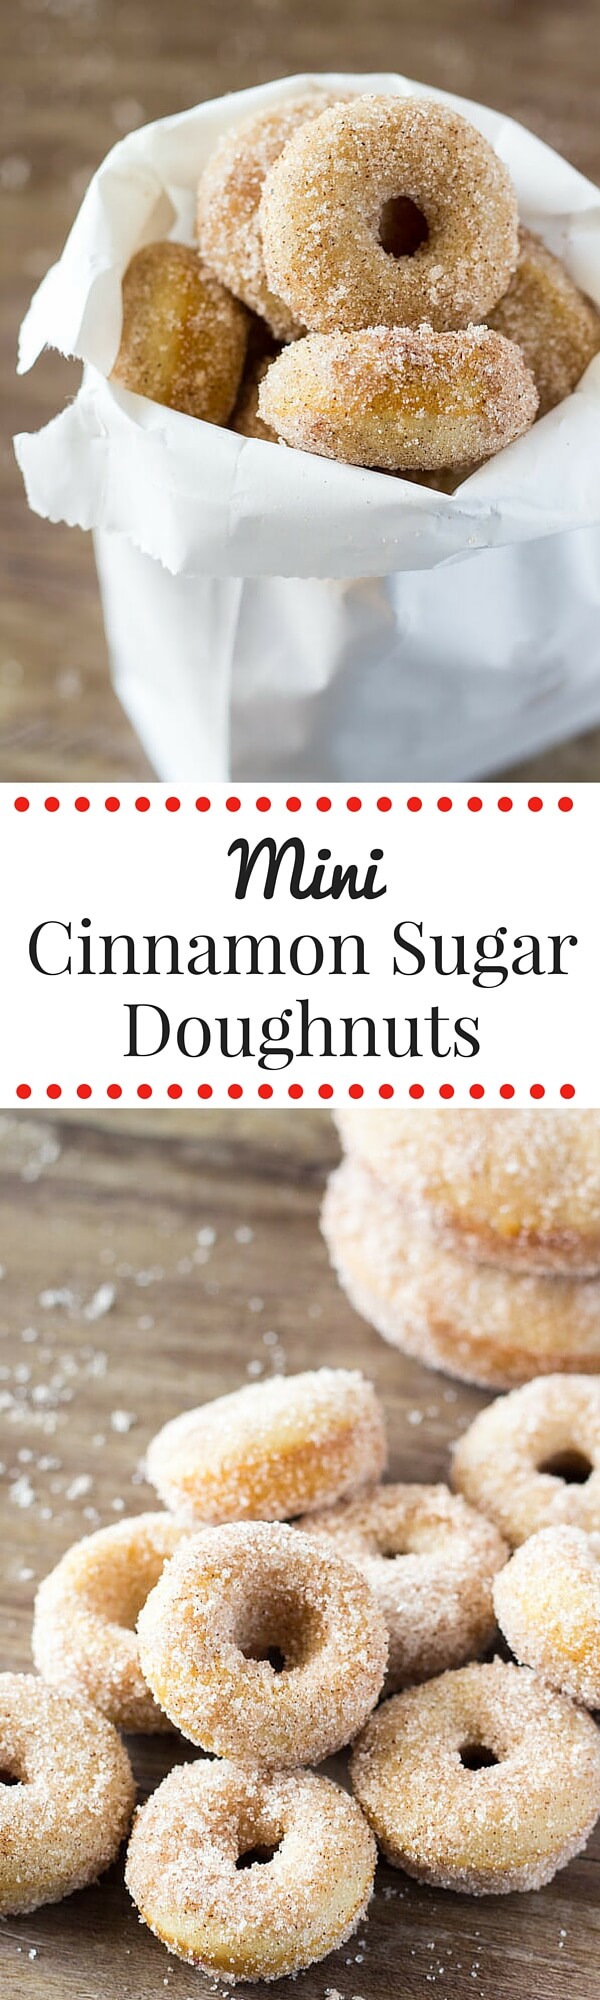 Mini Cinnamon Sugar Doughnuts just like the fair! With golden edges, a delicious coating of cinnamon sugar, and baked instead of fried - these are the PERFECT copycat recipe!